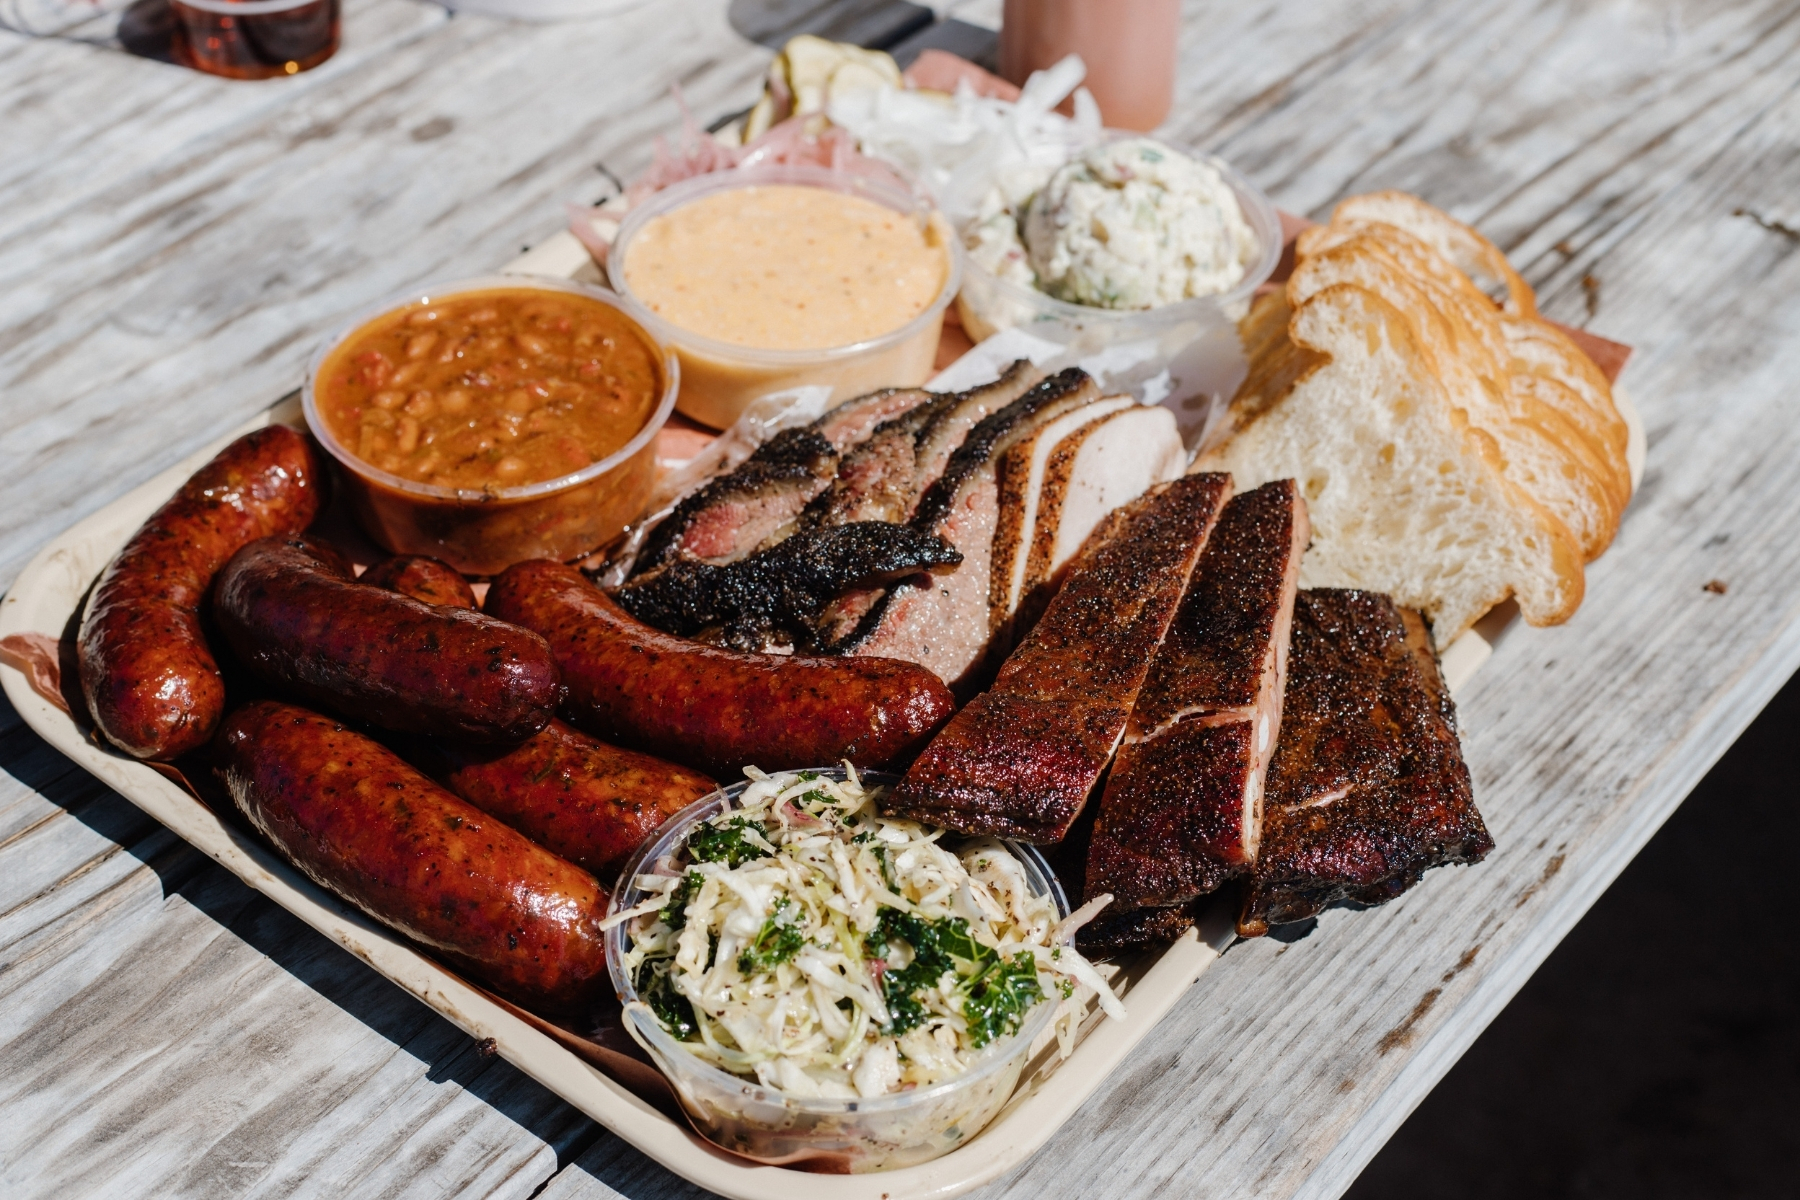 A packed tray of barbecue (ribs, links, beans, mac, slaw, bread) from Goldee's Barbecue